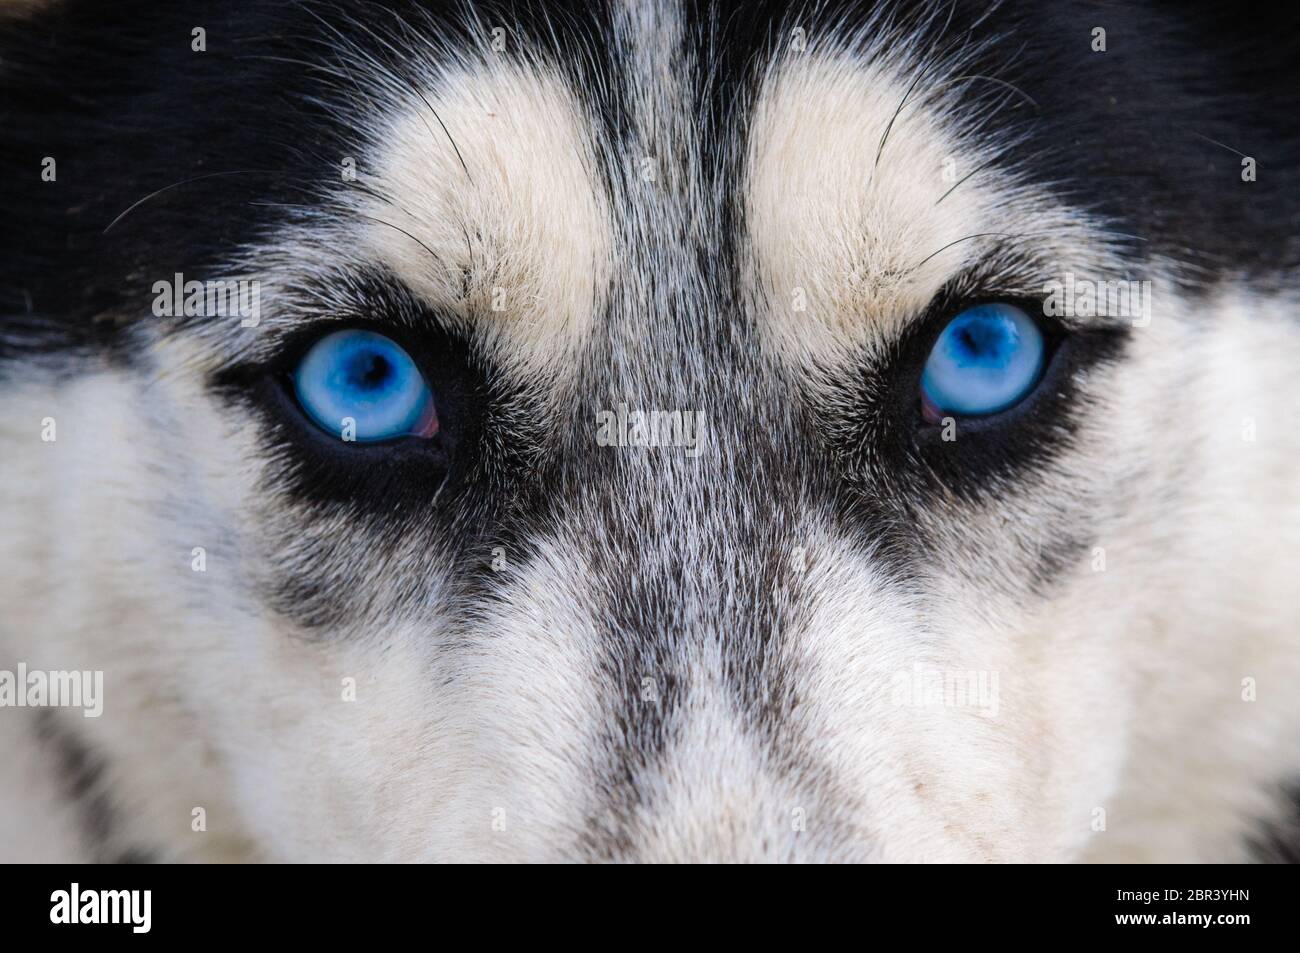 Dogs That Look Like Wolves With Blue Eyes